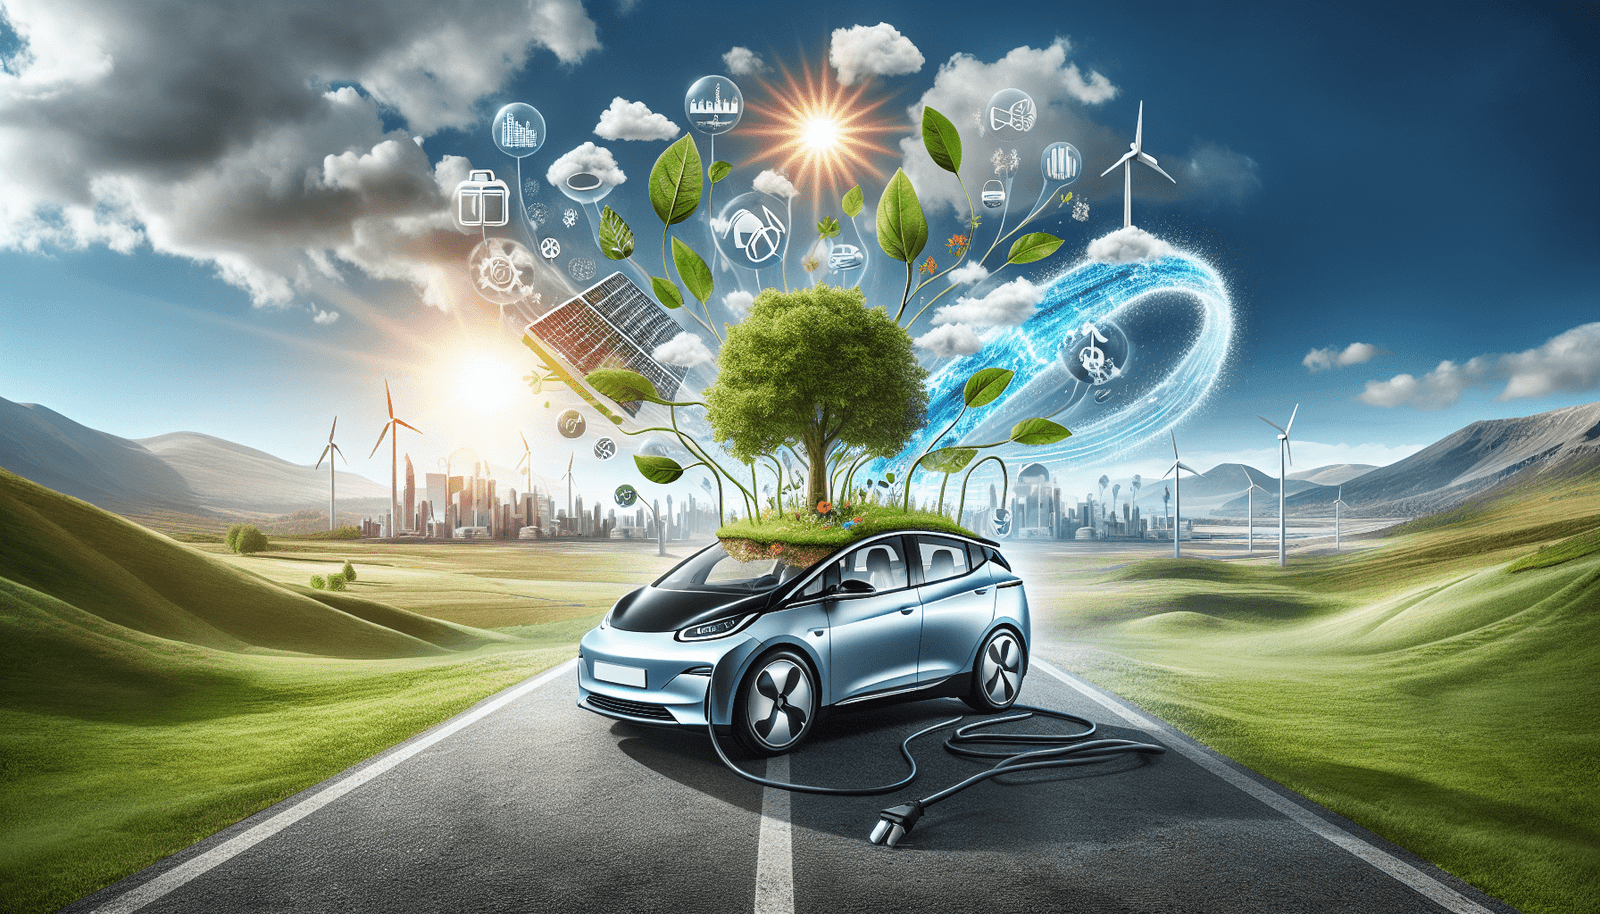 How Do Electric Vehicle Maintenance And Repairs Impact Sustainability?